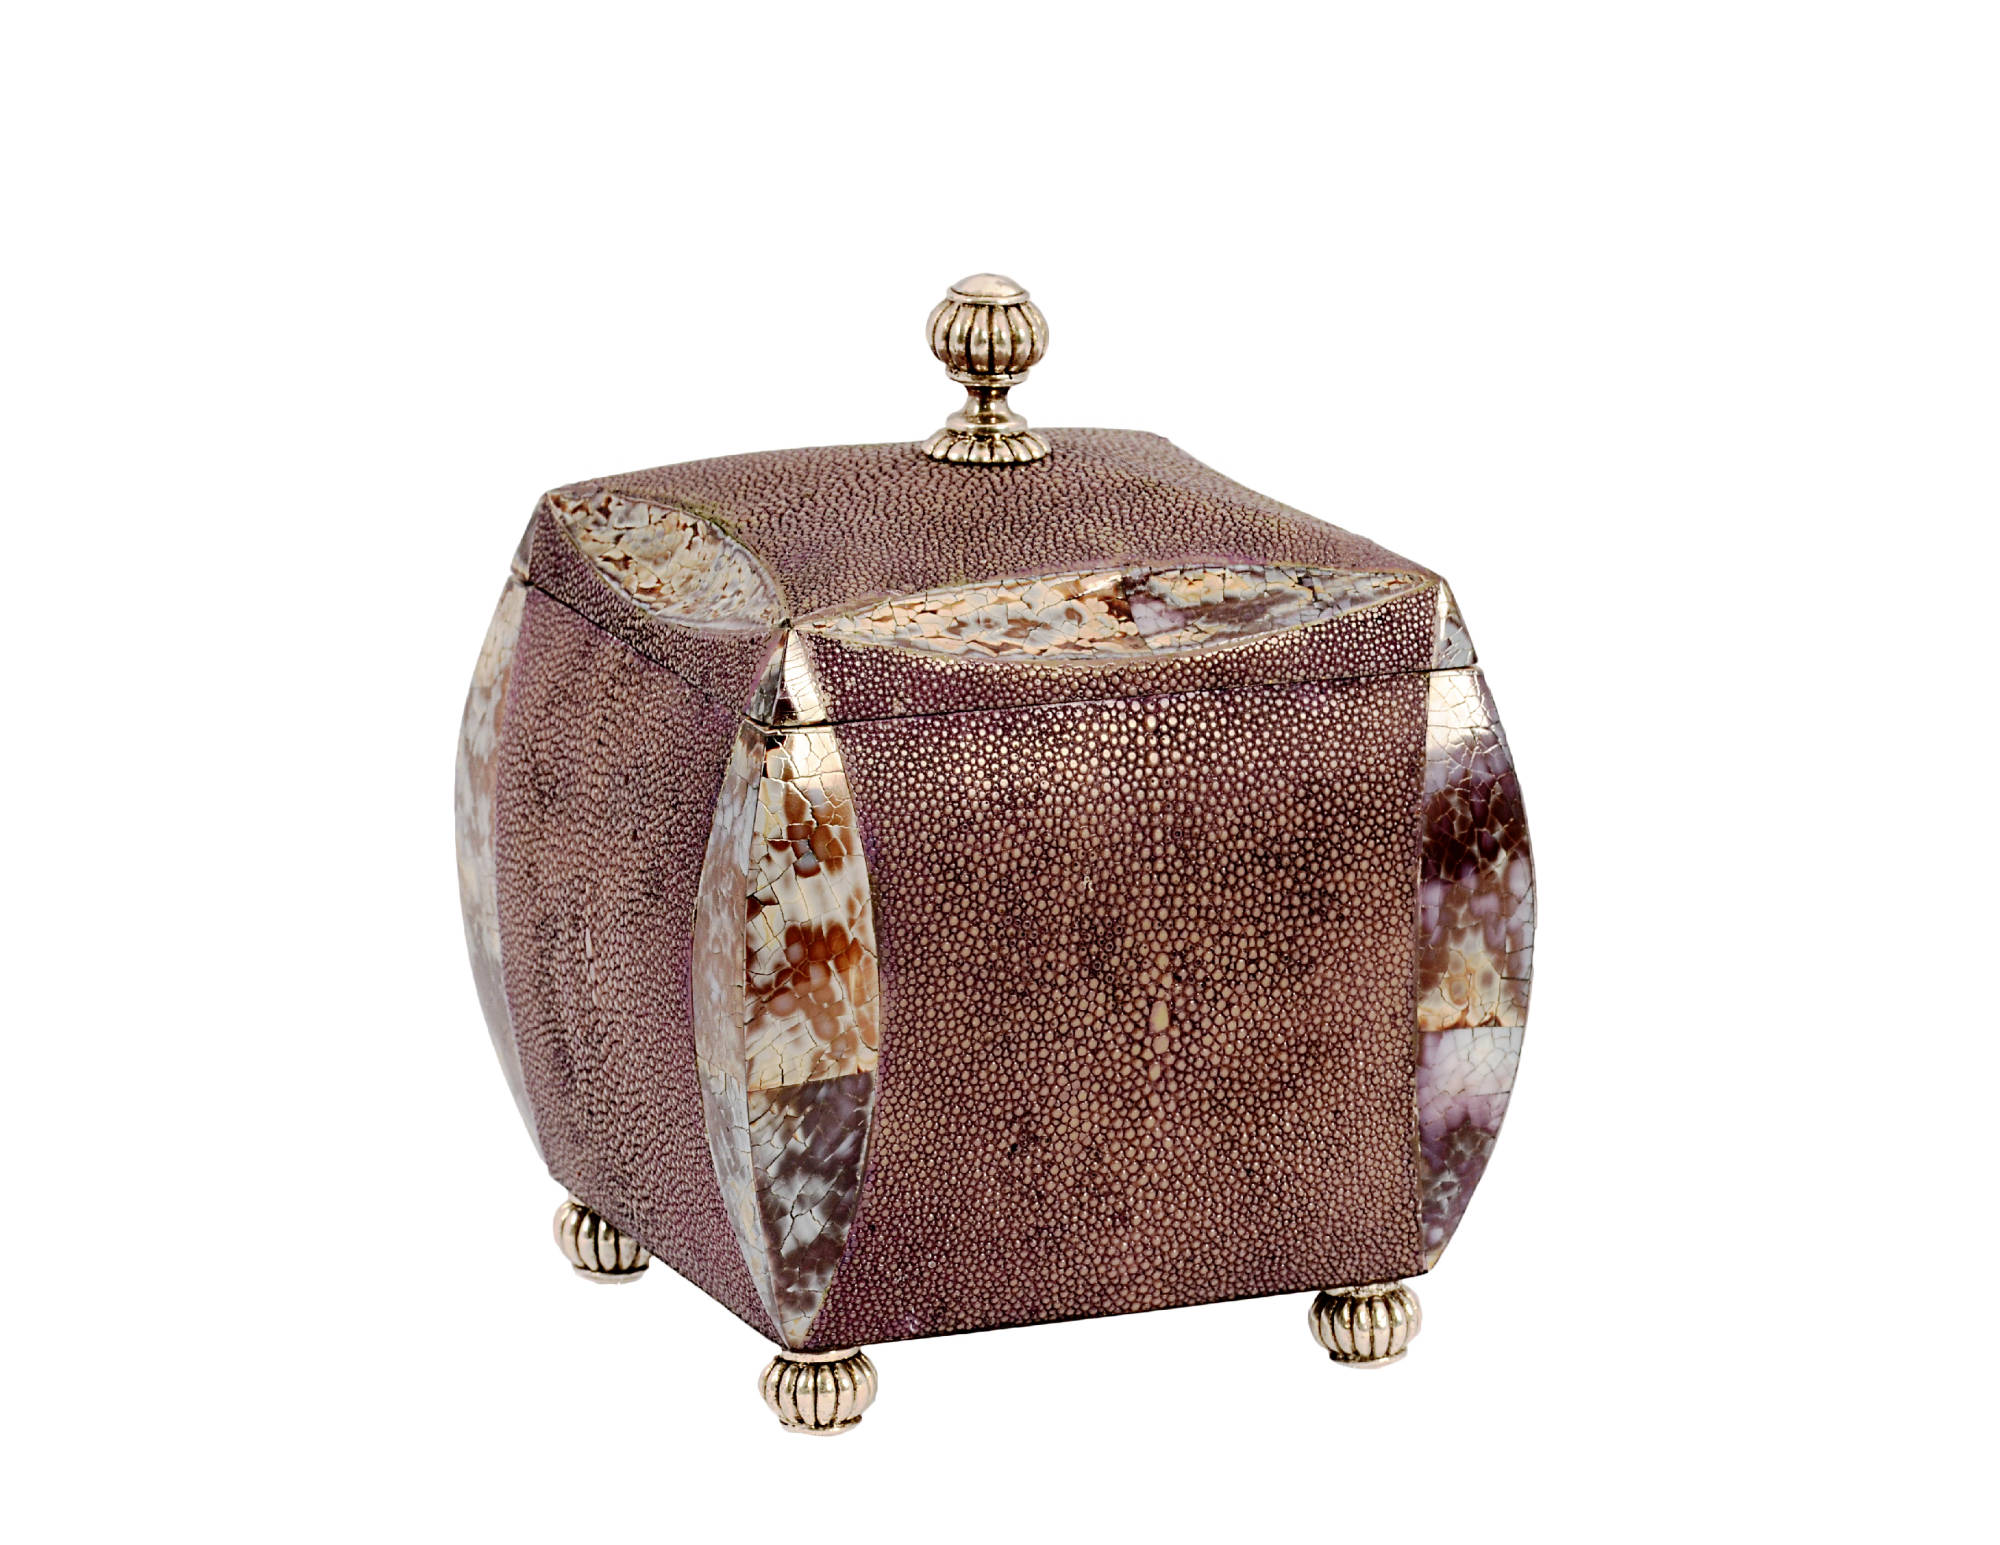 Dome Sq. box shagreen and tiger cowrie shell with silver plated handle & feet